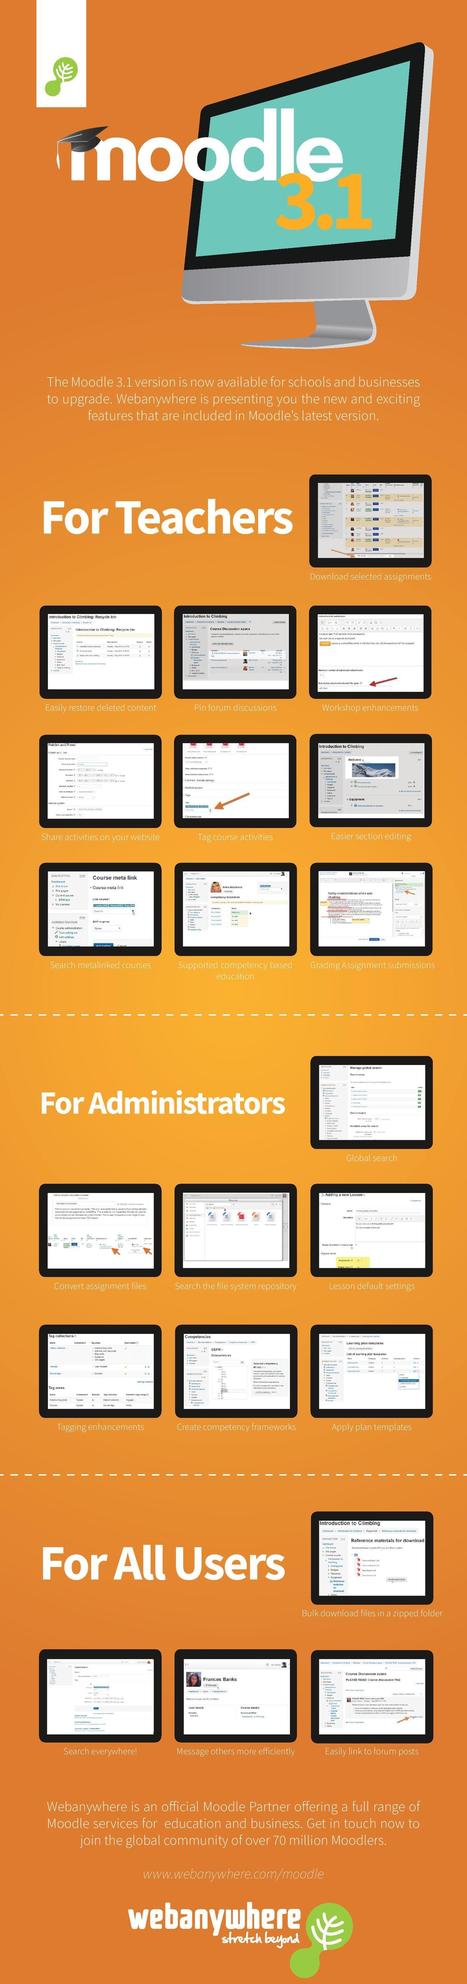 Moodle 3.1 New Features Infographic - e-Learning Infographics | mOOdle_ation[s] | Scoop.it